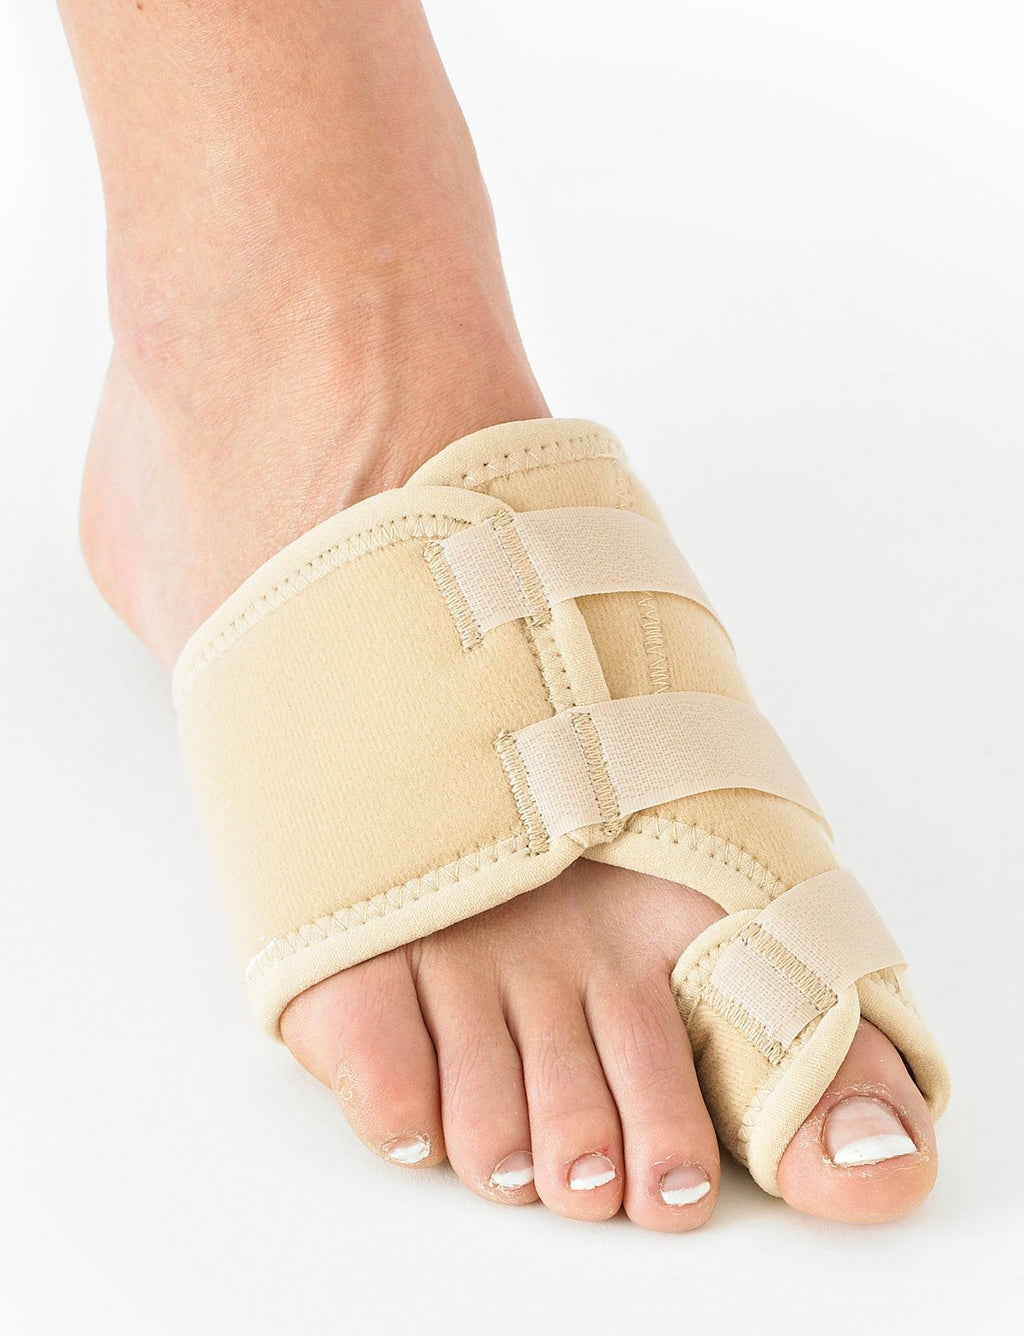 [Australia] - Neo G Bunion Corrector, Soft Support - for Big Toe Alignment, Hallux Valgus Correction, Inflammation, Pre/Post-Operative Aid - Malleable Metal Splint - Class 1 Medical Device (Left) Left 